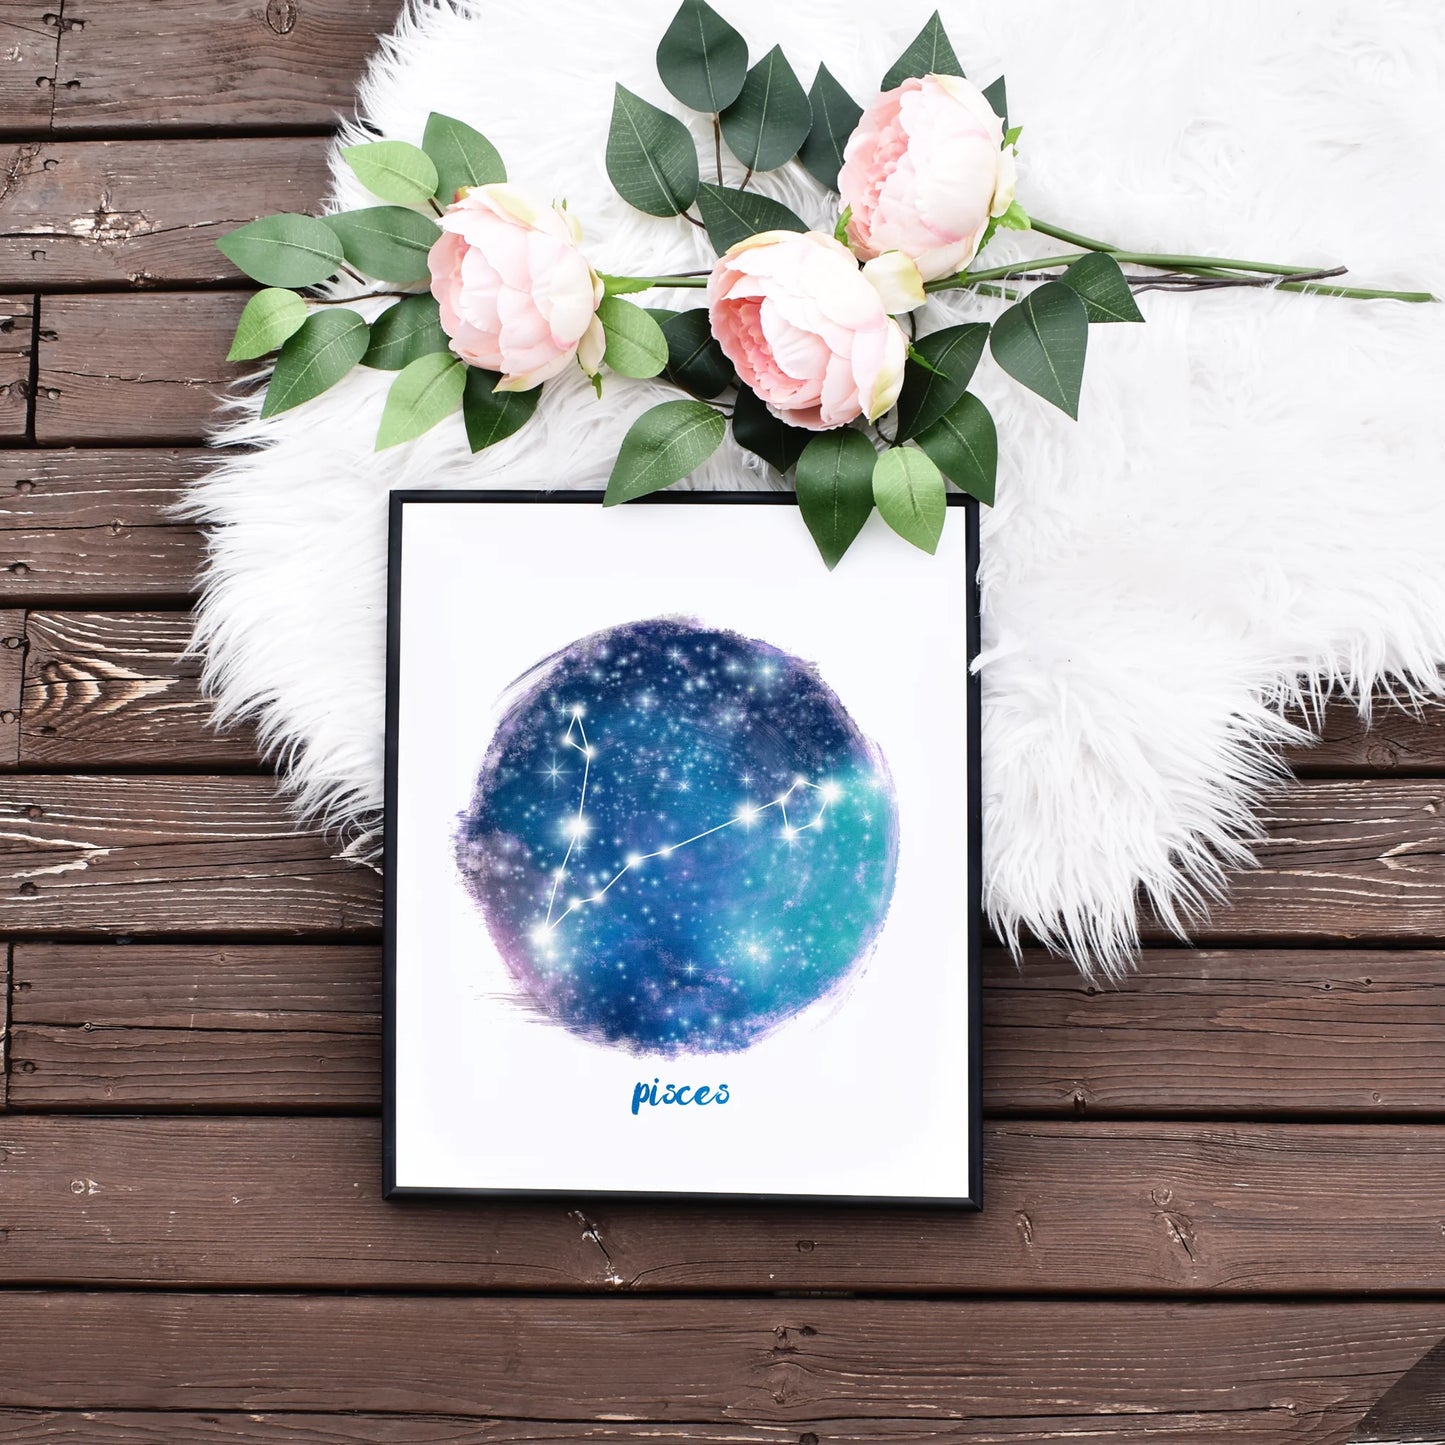 Printable Pisces Constellation Wall Decor on a Budget